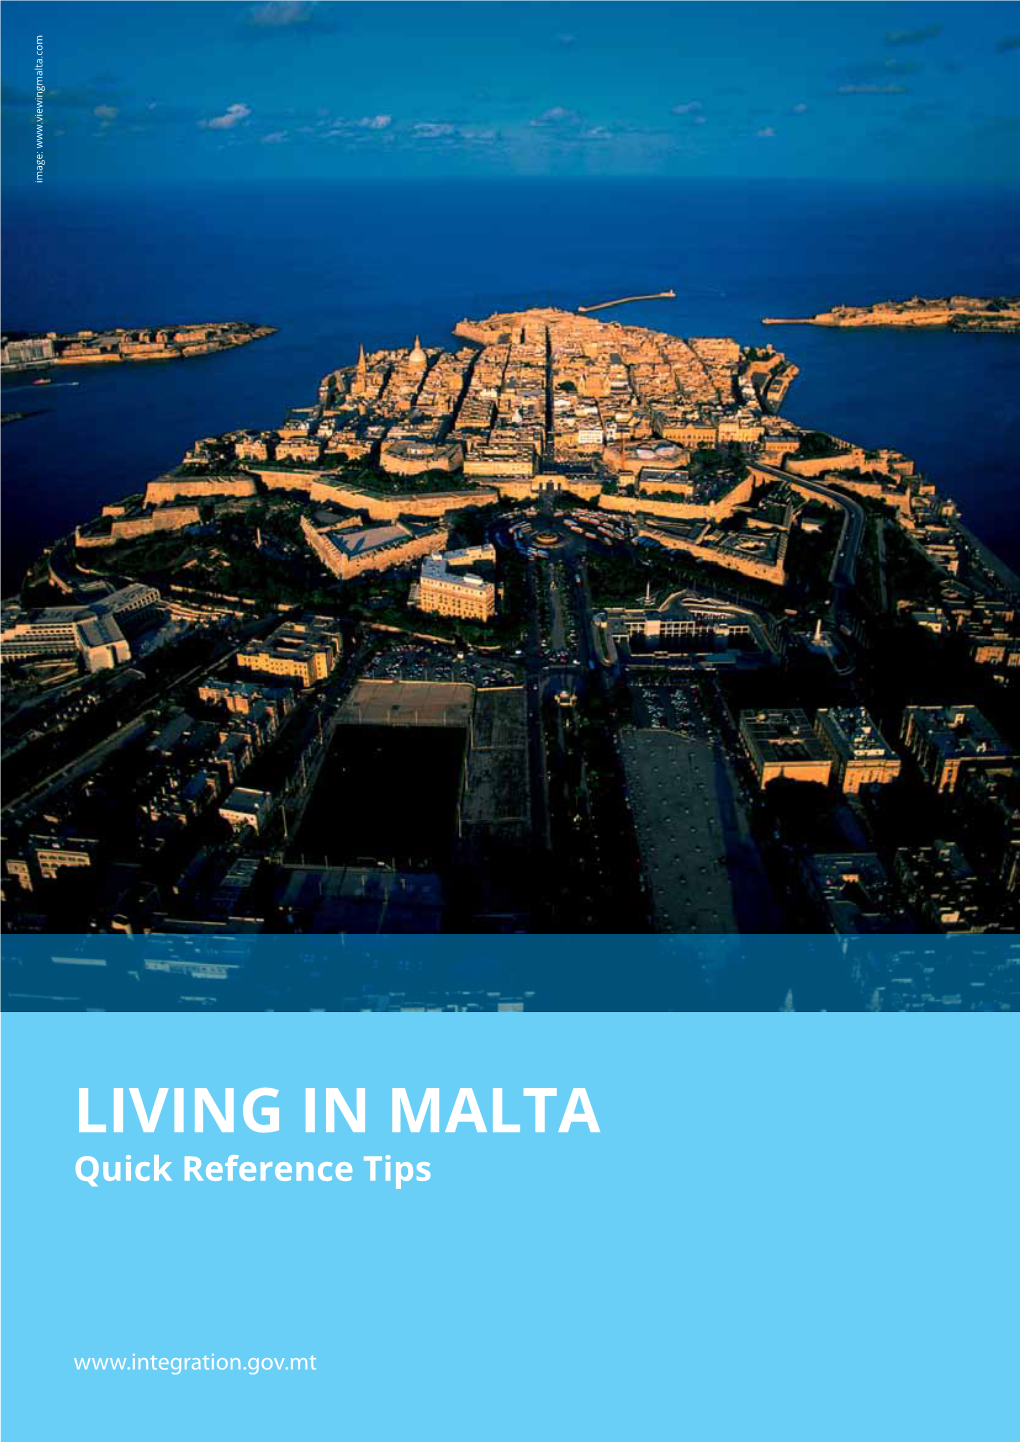 LIVING in MALTA Quick Reference Tips